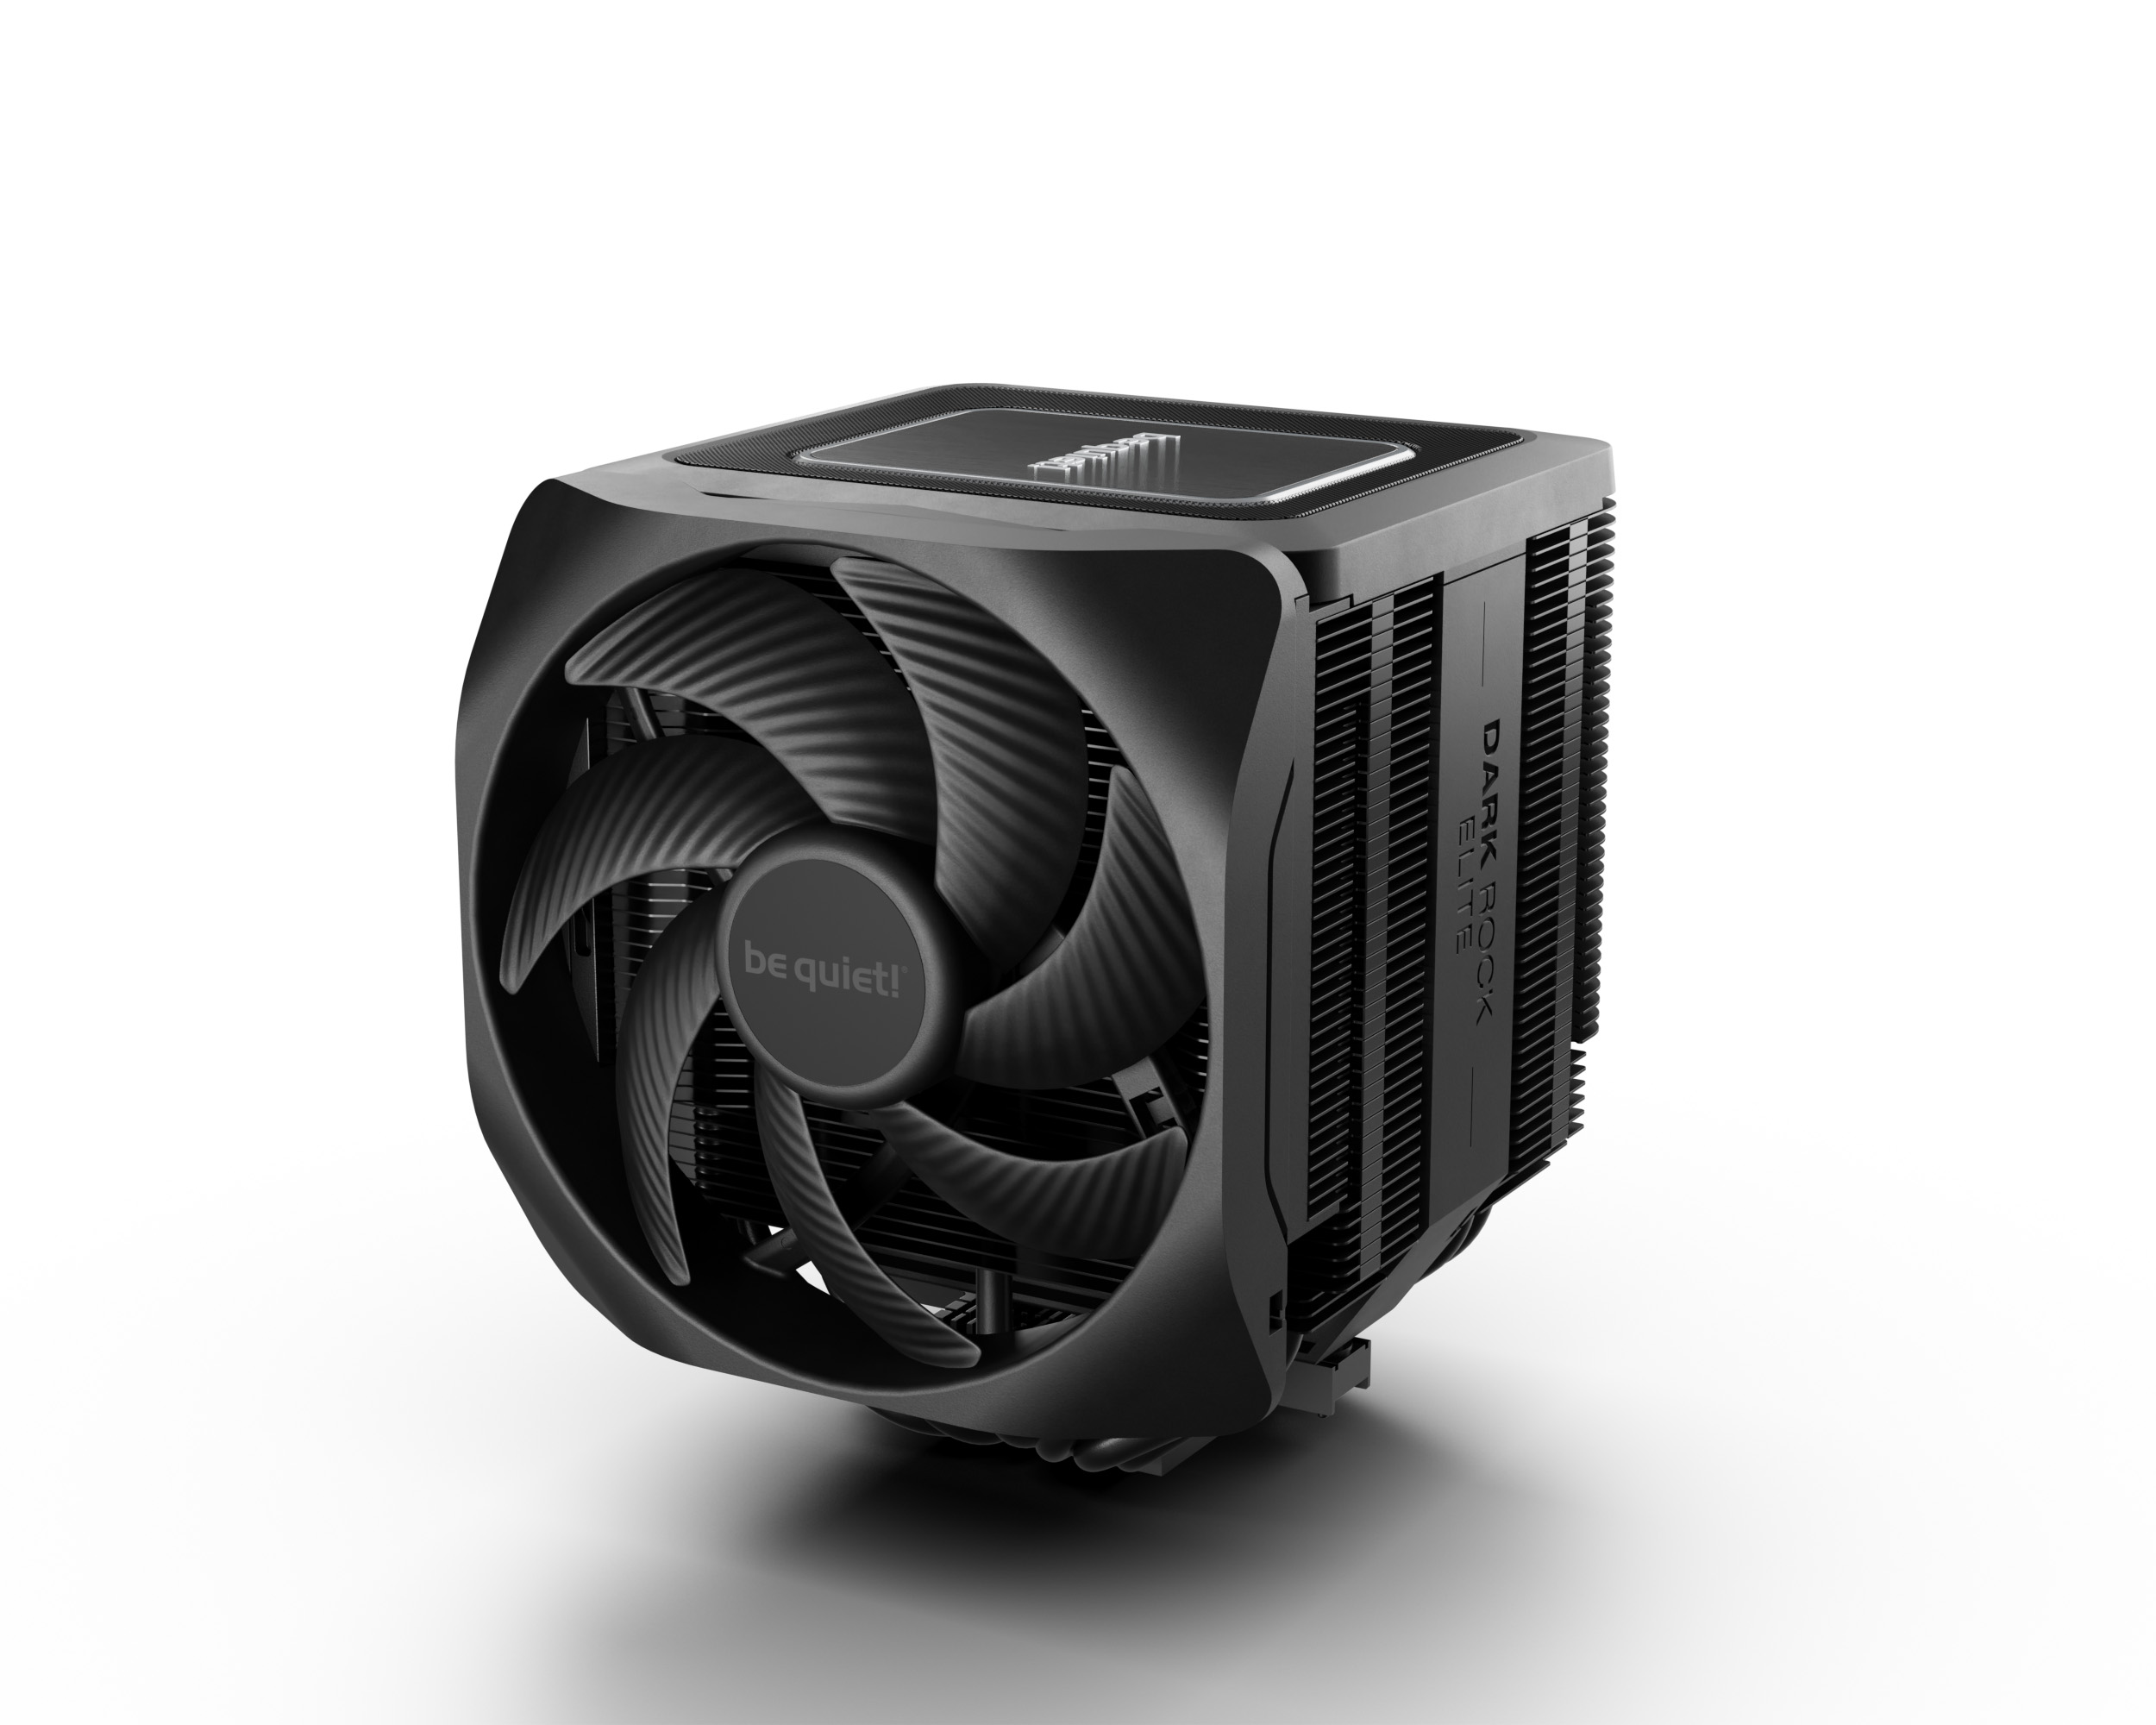 DARK ROCK ELITE silent high-end Air coolers from be quiet!